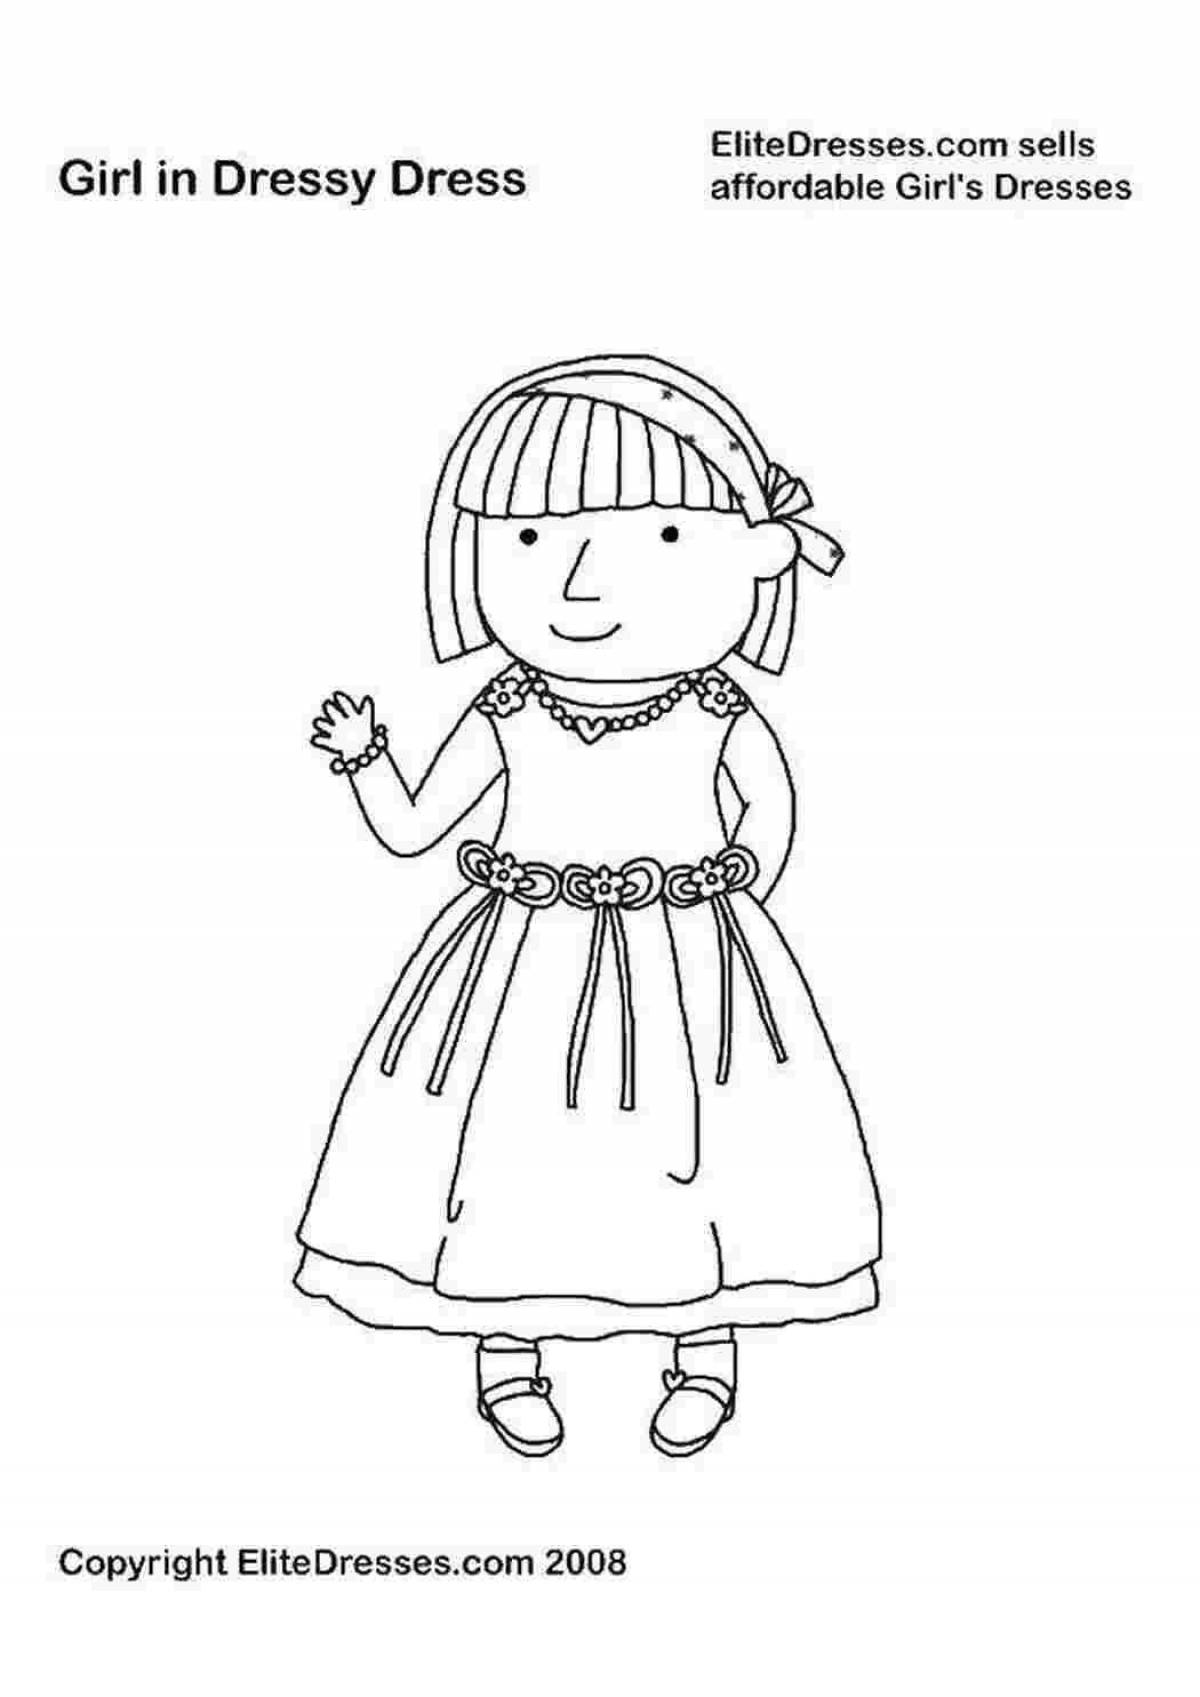 Delightful coloring of baby doll in a dress